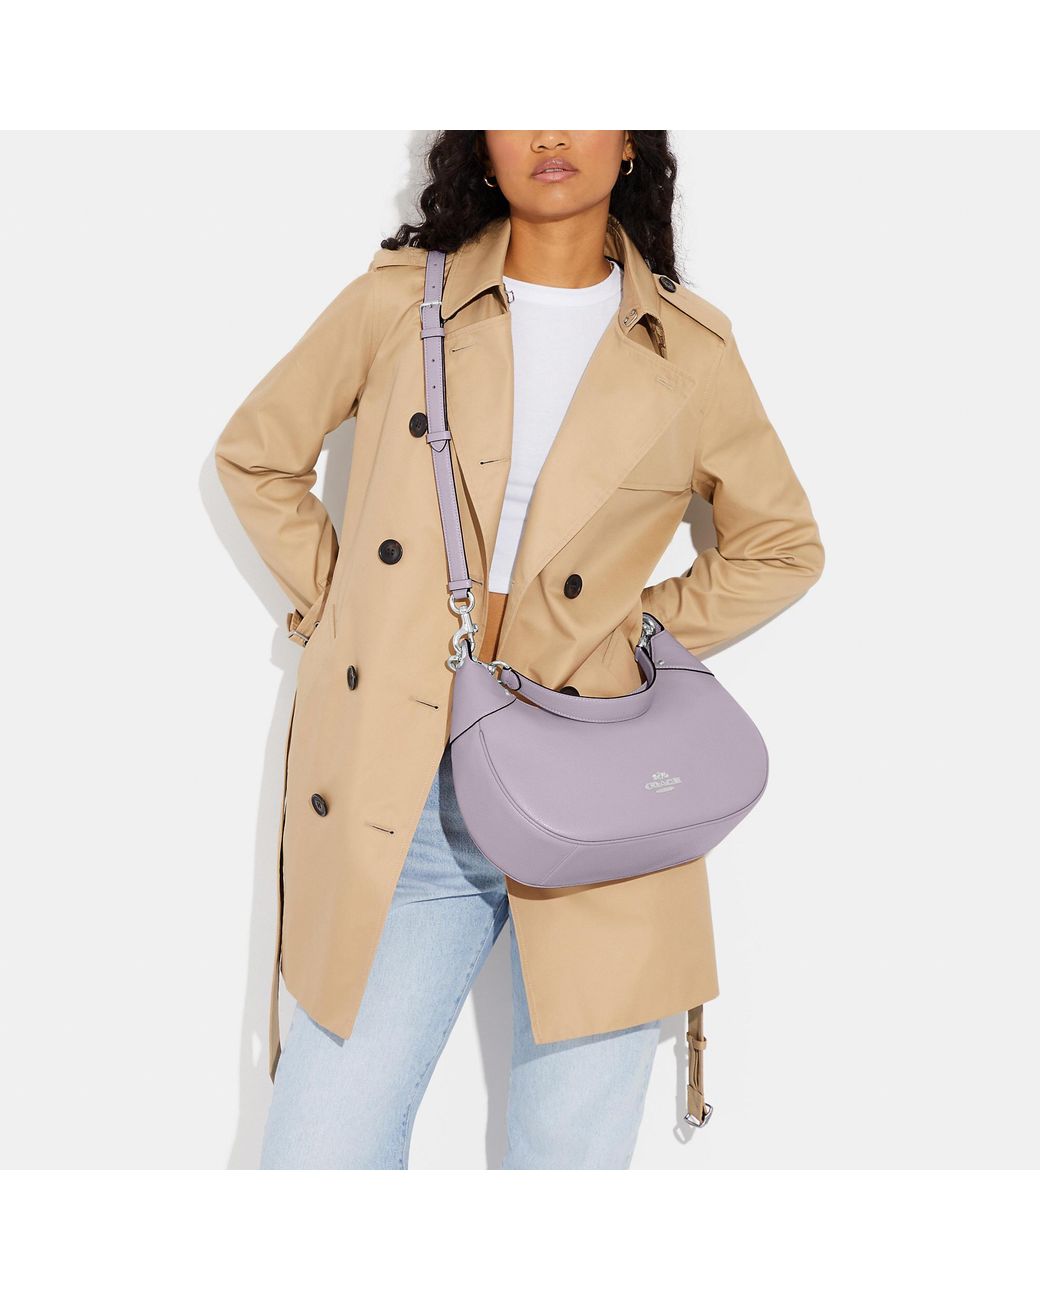 Coach Outlet Sale Up to 70% Off Coach Bags And Coats